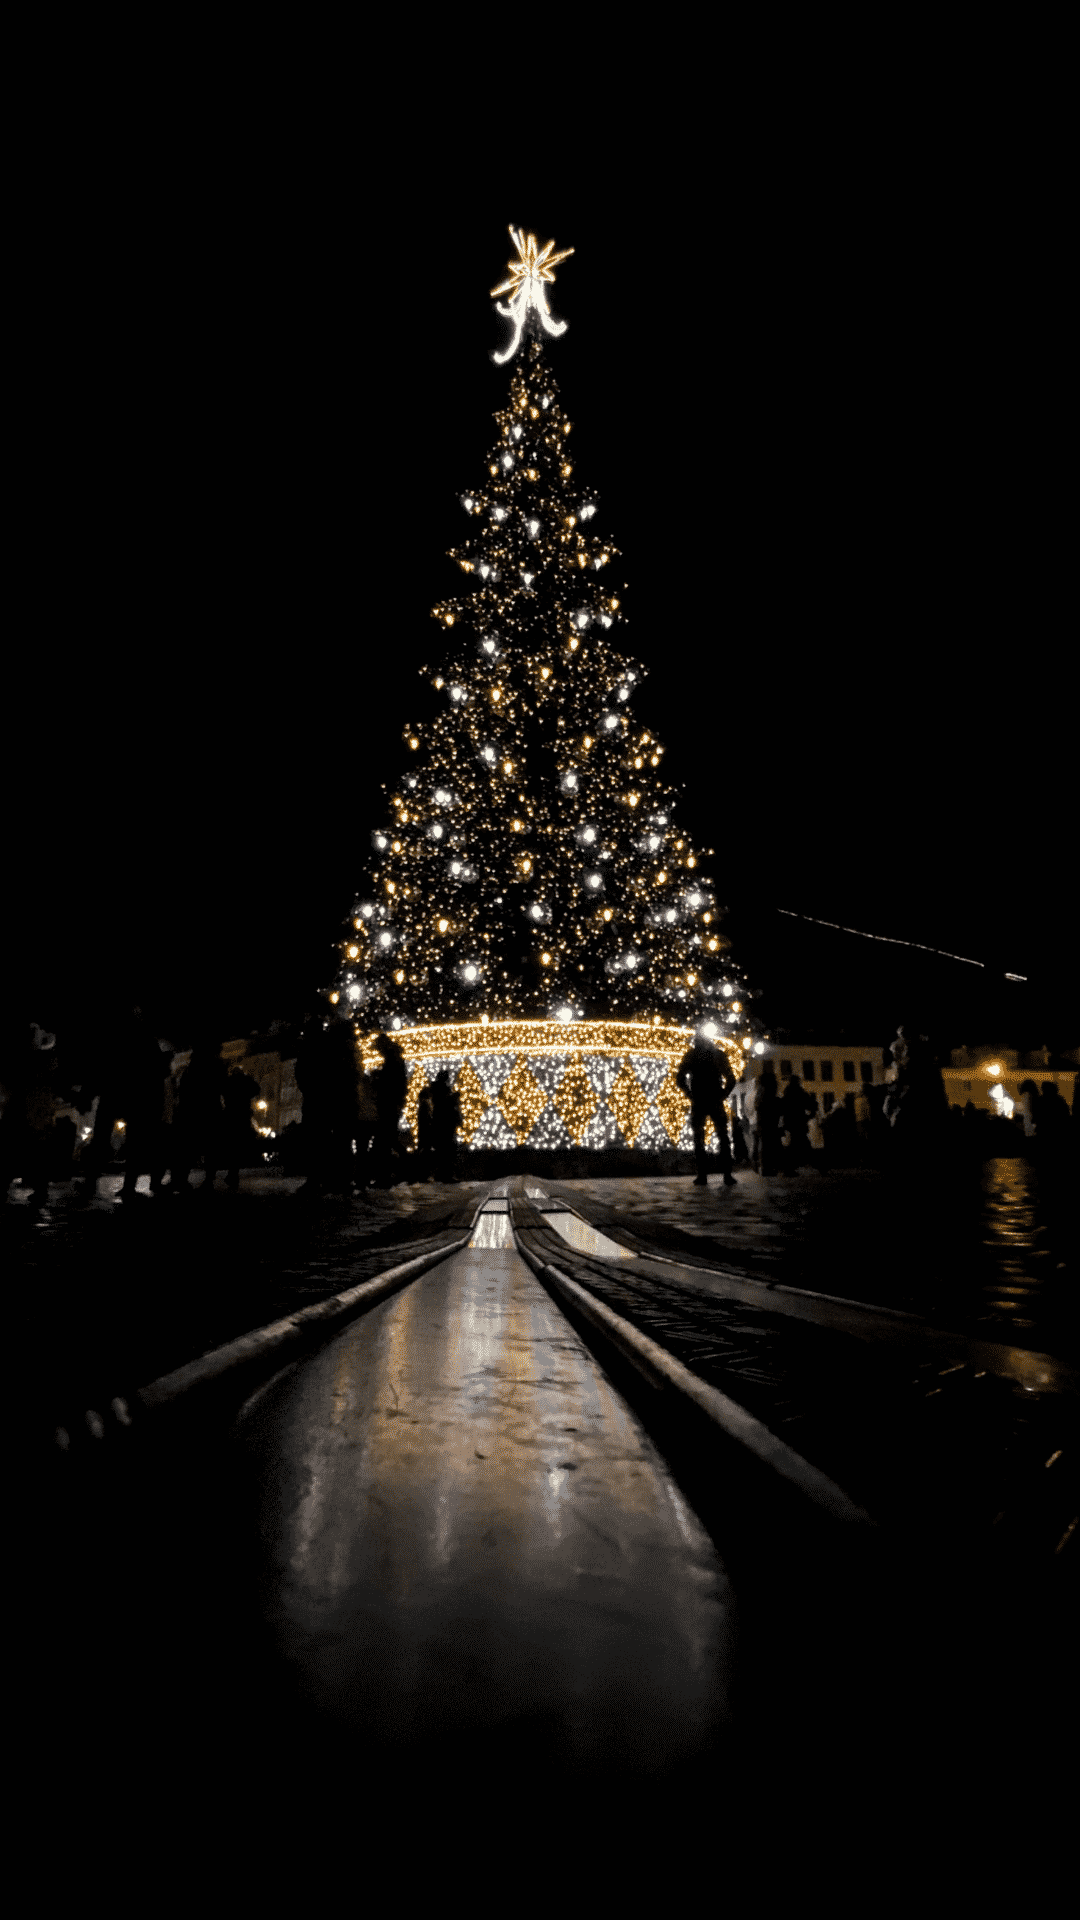 A christmas tree with lights and people around it - December, Christmas, magic, warm, Christmas lights